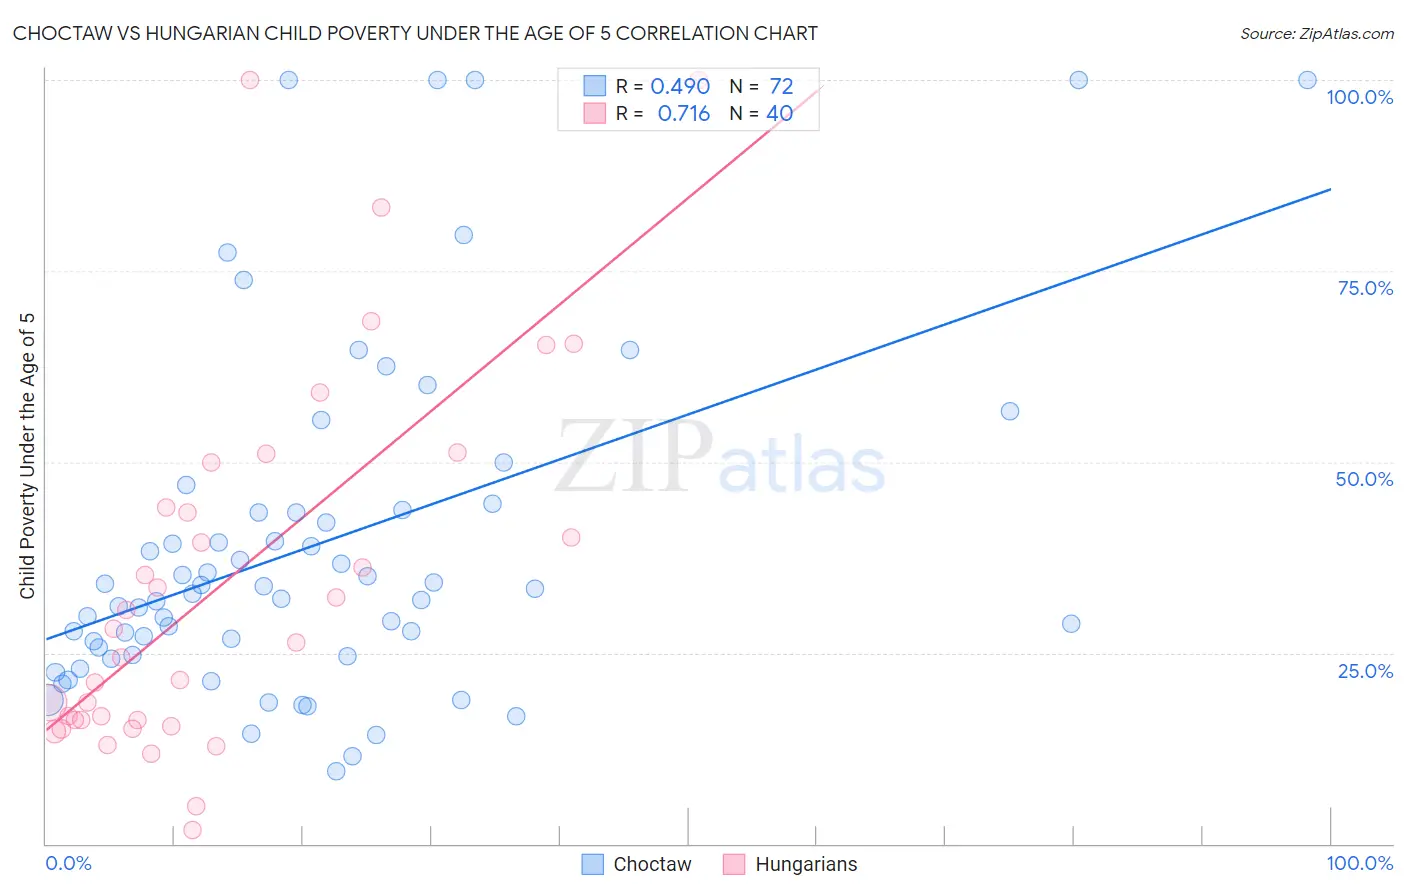 Choctaw vs Hungarian Child Poverty Under the Age of 5